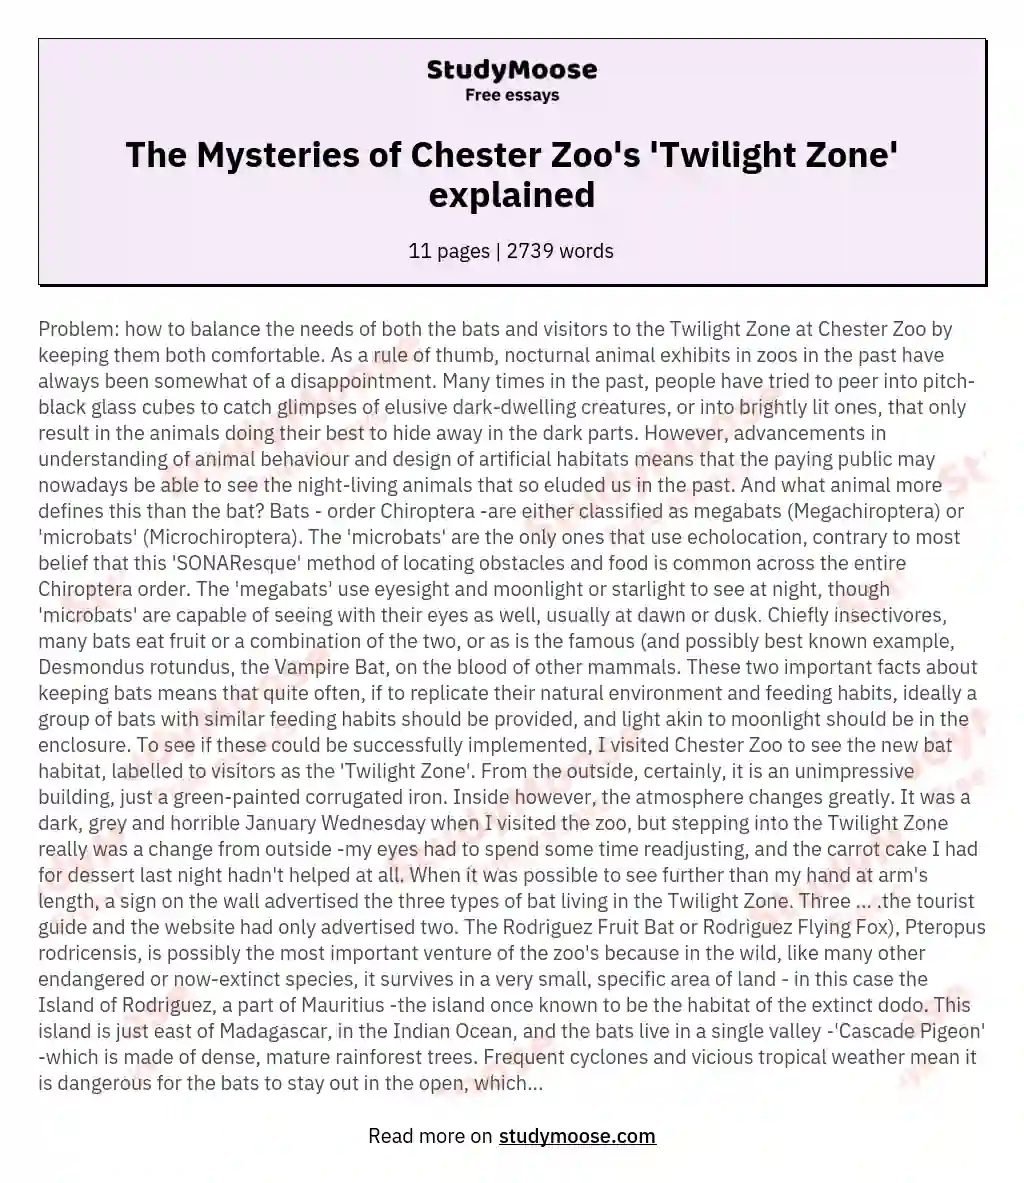 The Mysteries of Chester Zoo's 'Twilight Zone' explained